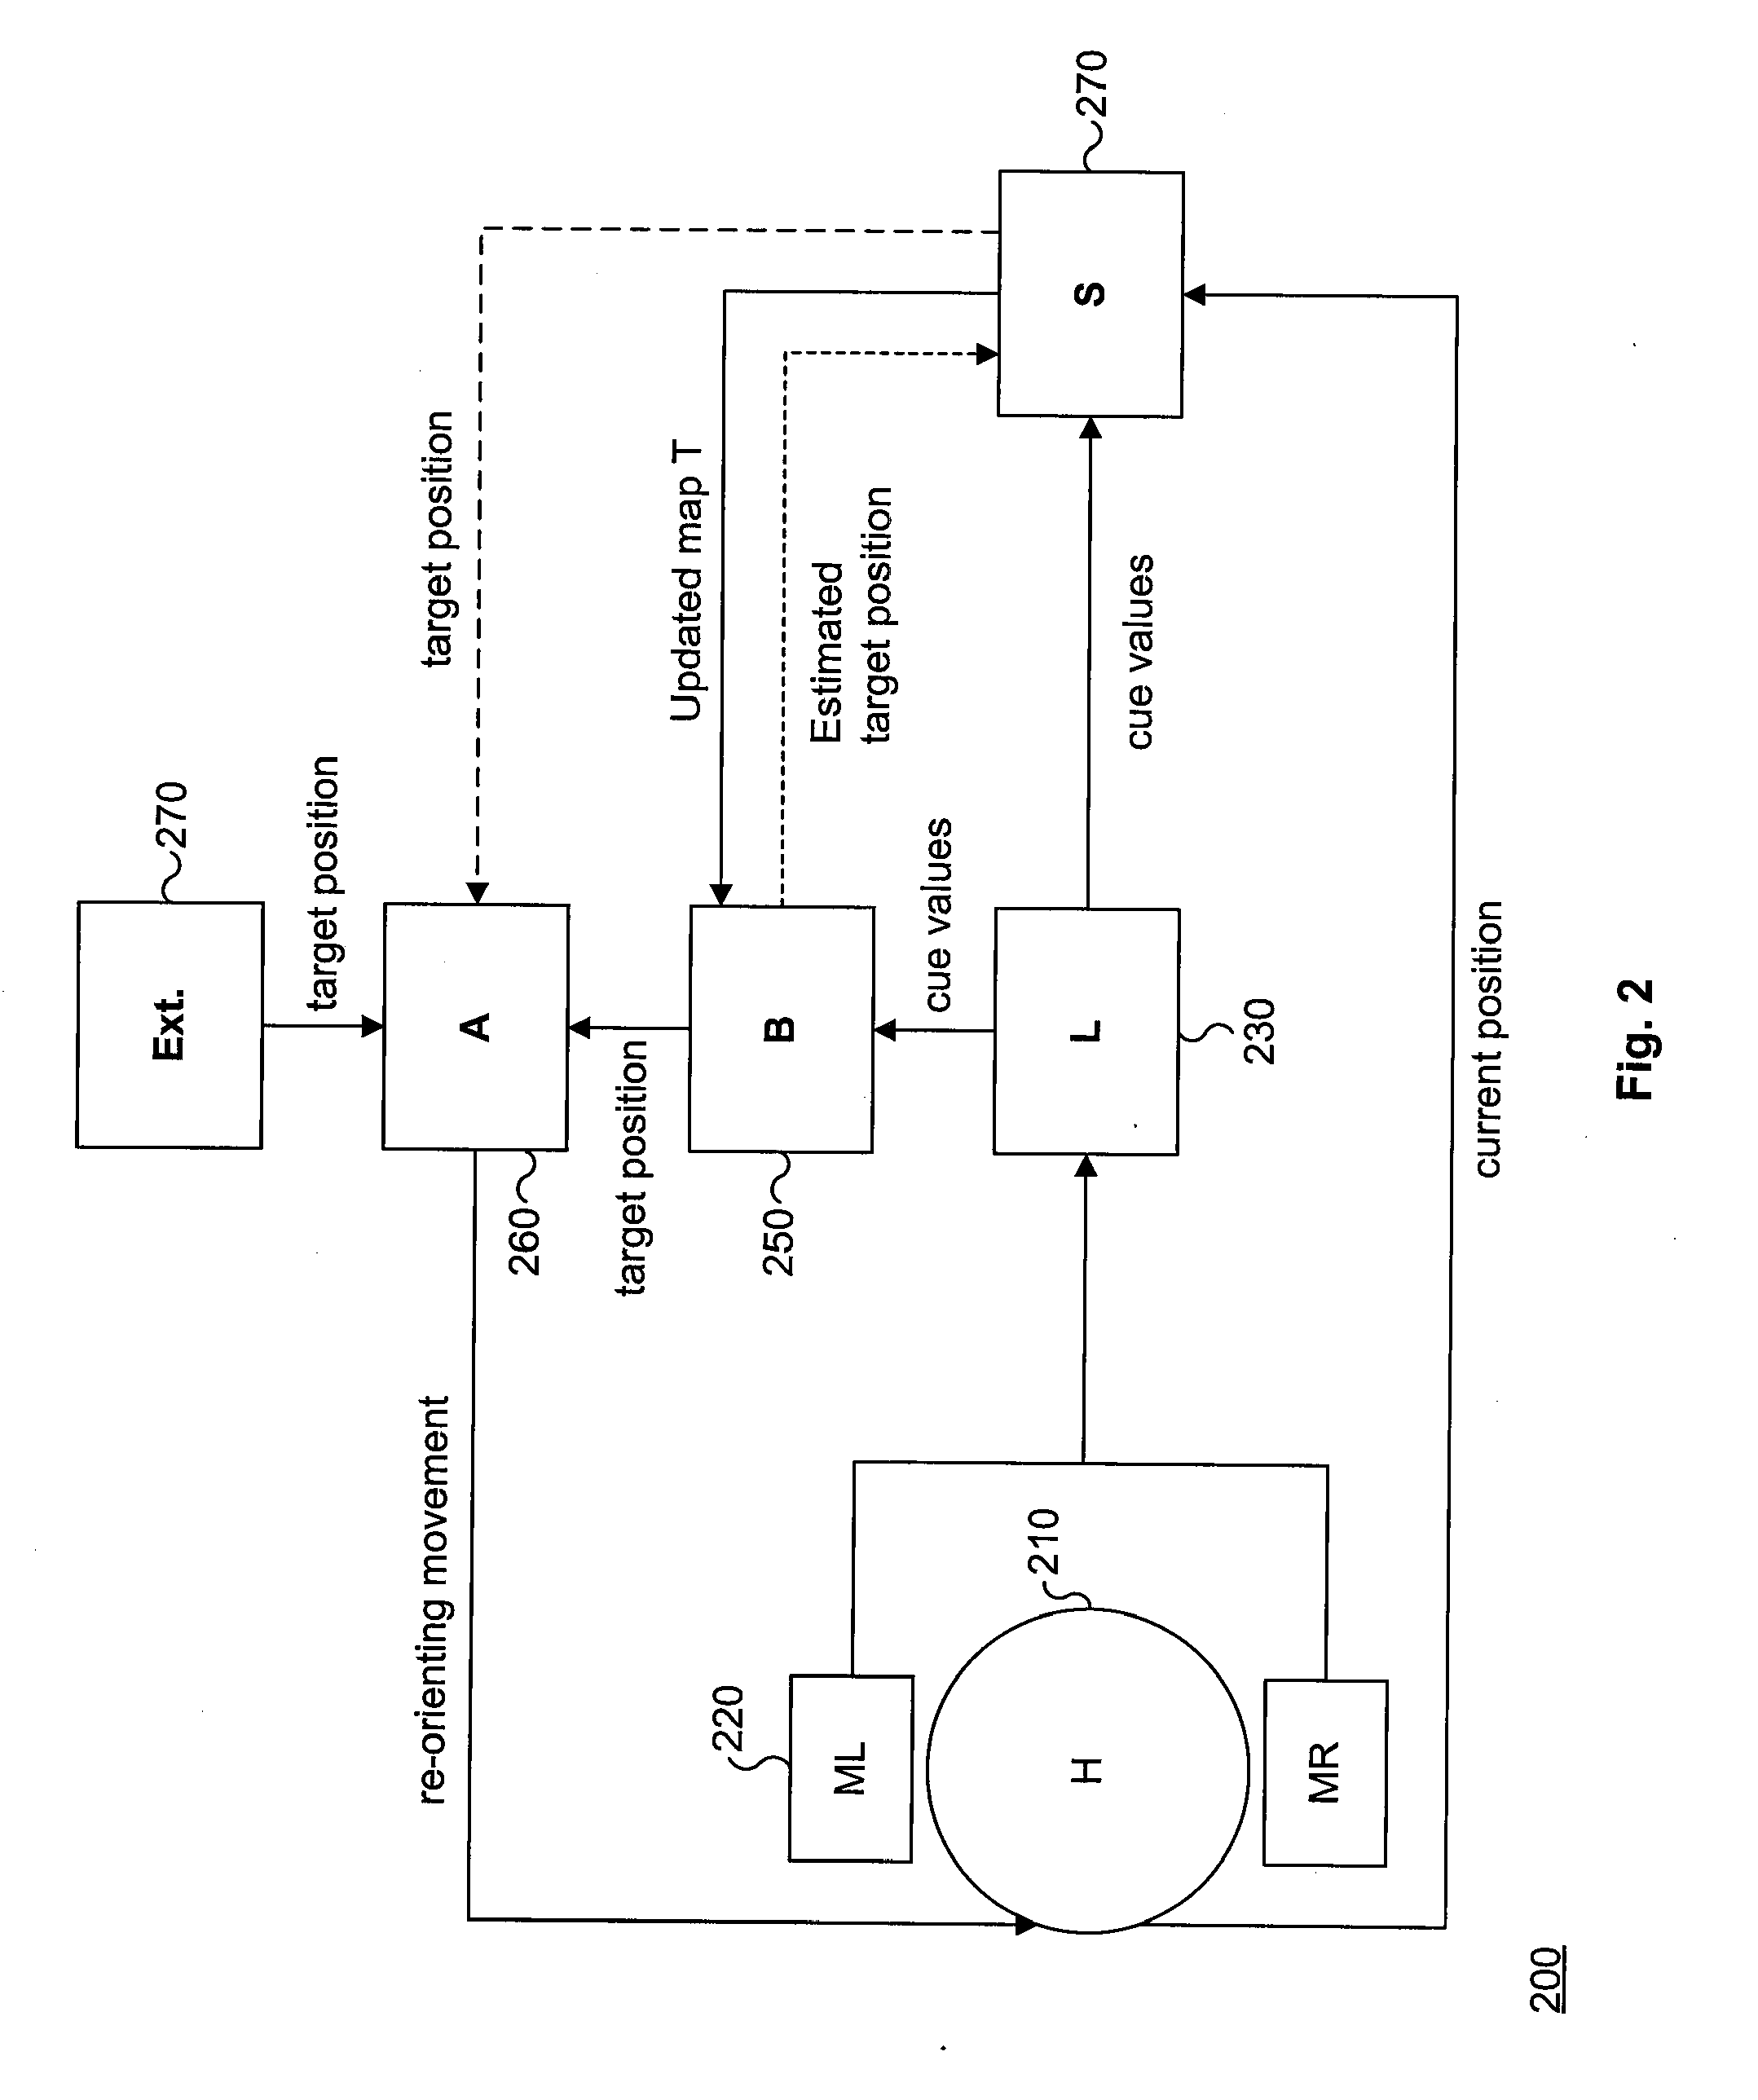 Method for Estimating the Position of a Sound Source for Online Calibration of Auditory Cue to Location Transformations